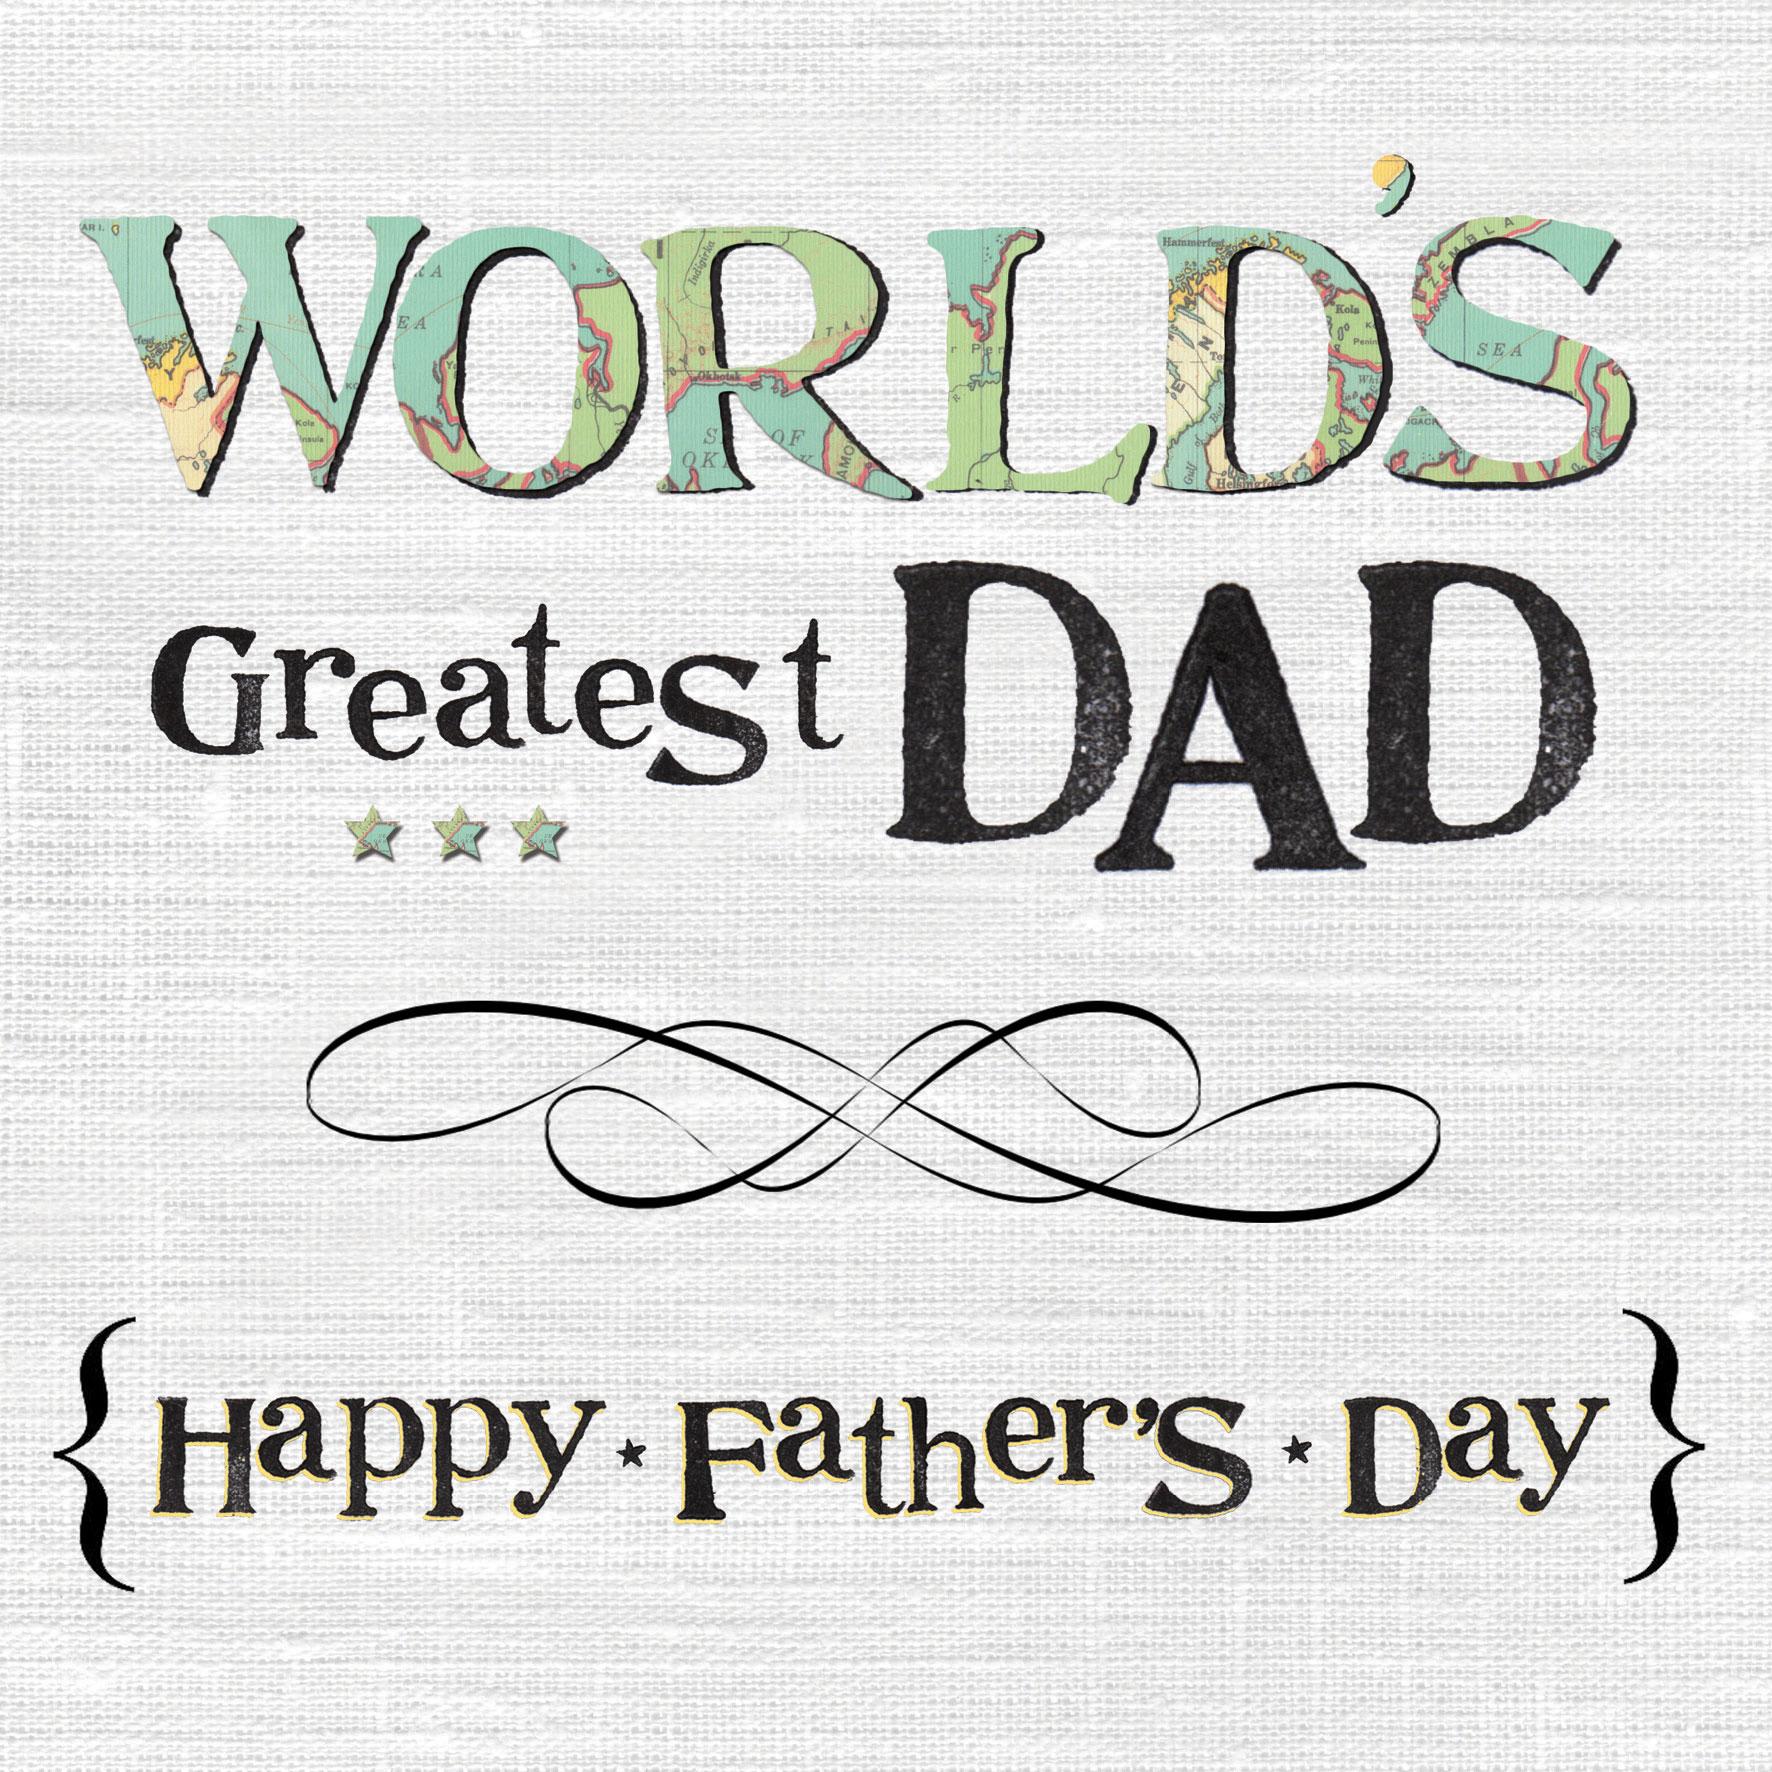 2018!! Happy Fathers Day Wishes Quotes SMS Whatsapp Status DP Image